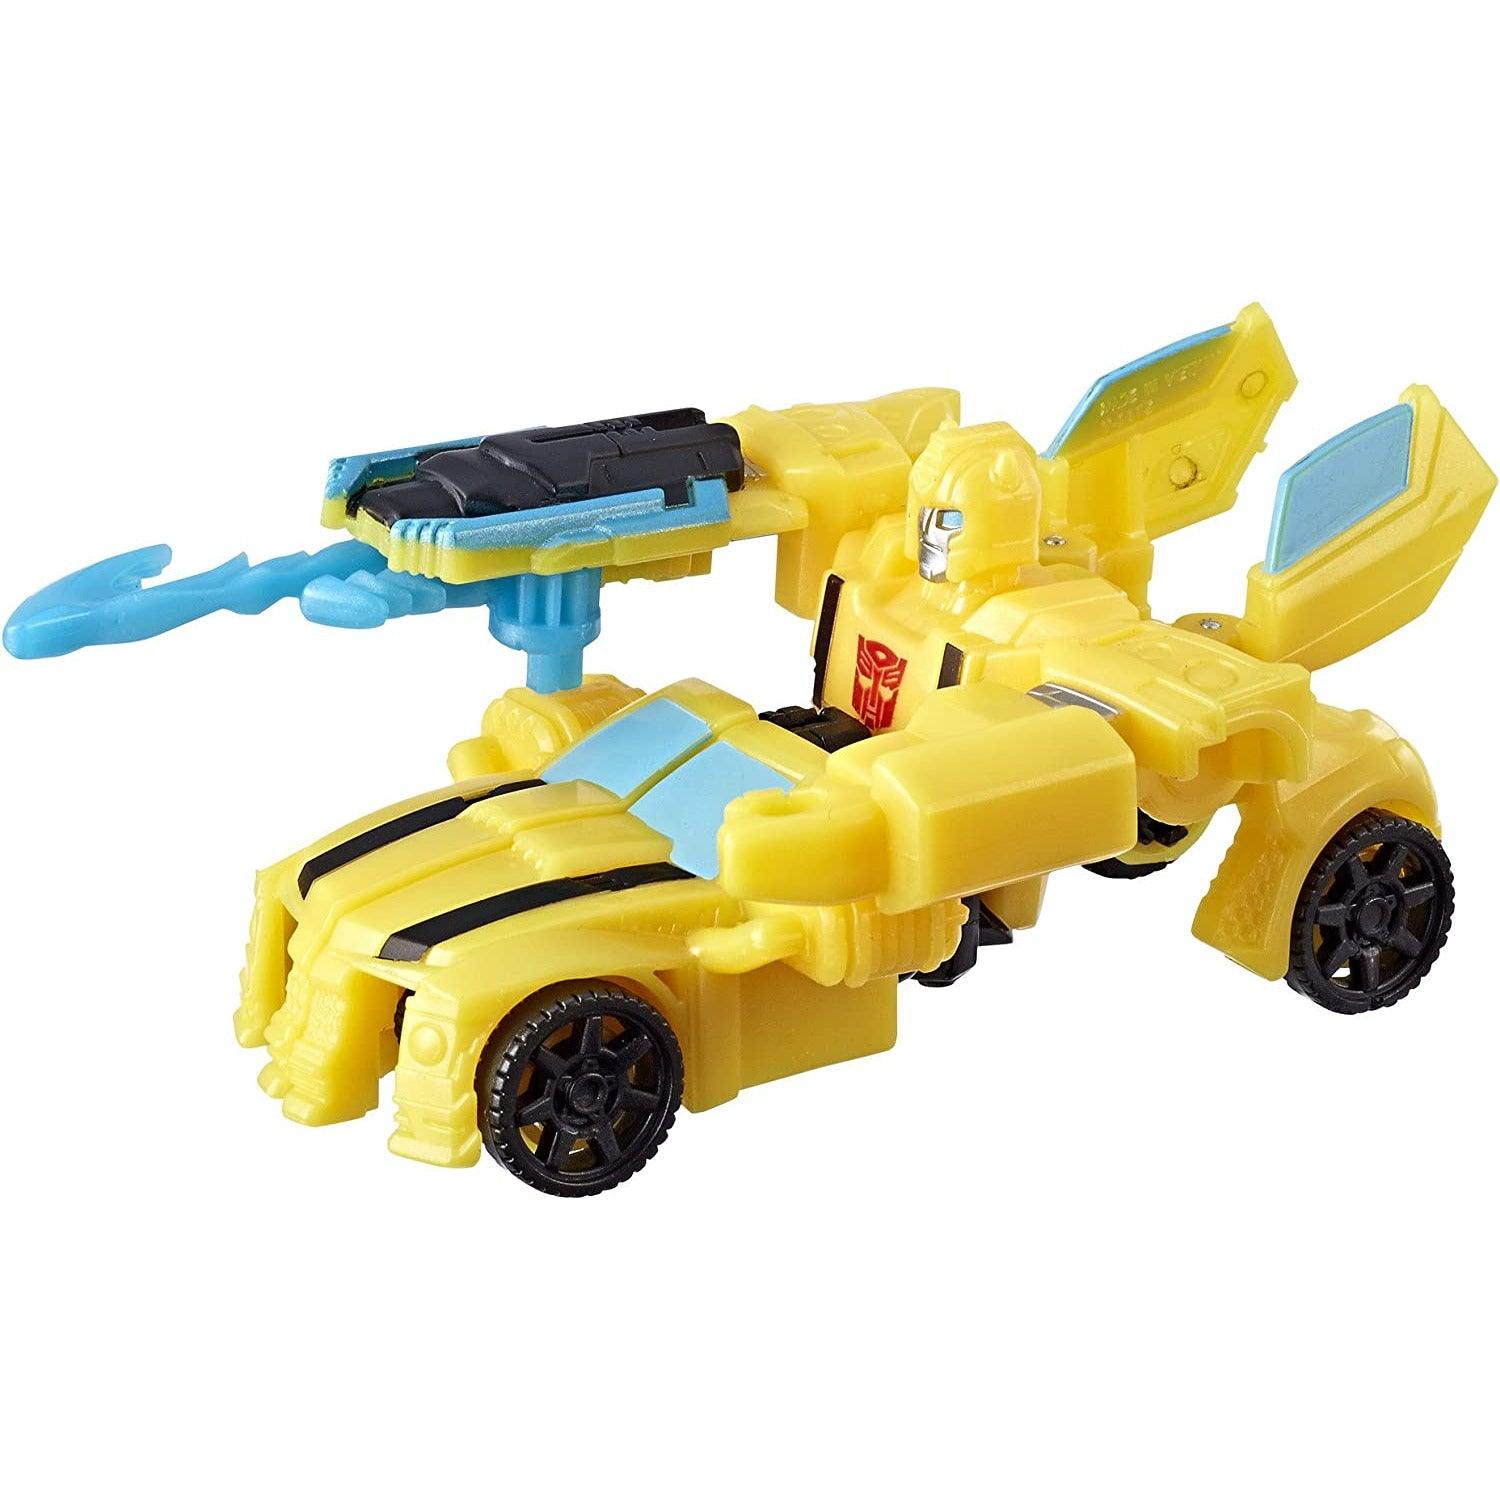 Transformers Bumblebee Cyberverse Adventures Action Attackers Warrior Class Bumblebee Sting Shot Move 5.4 Inch - BumbleToys - 8+ Years, Boys, Eagle Plus, Figures, Pre-Order, Transformers